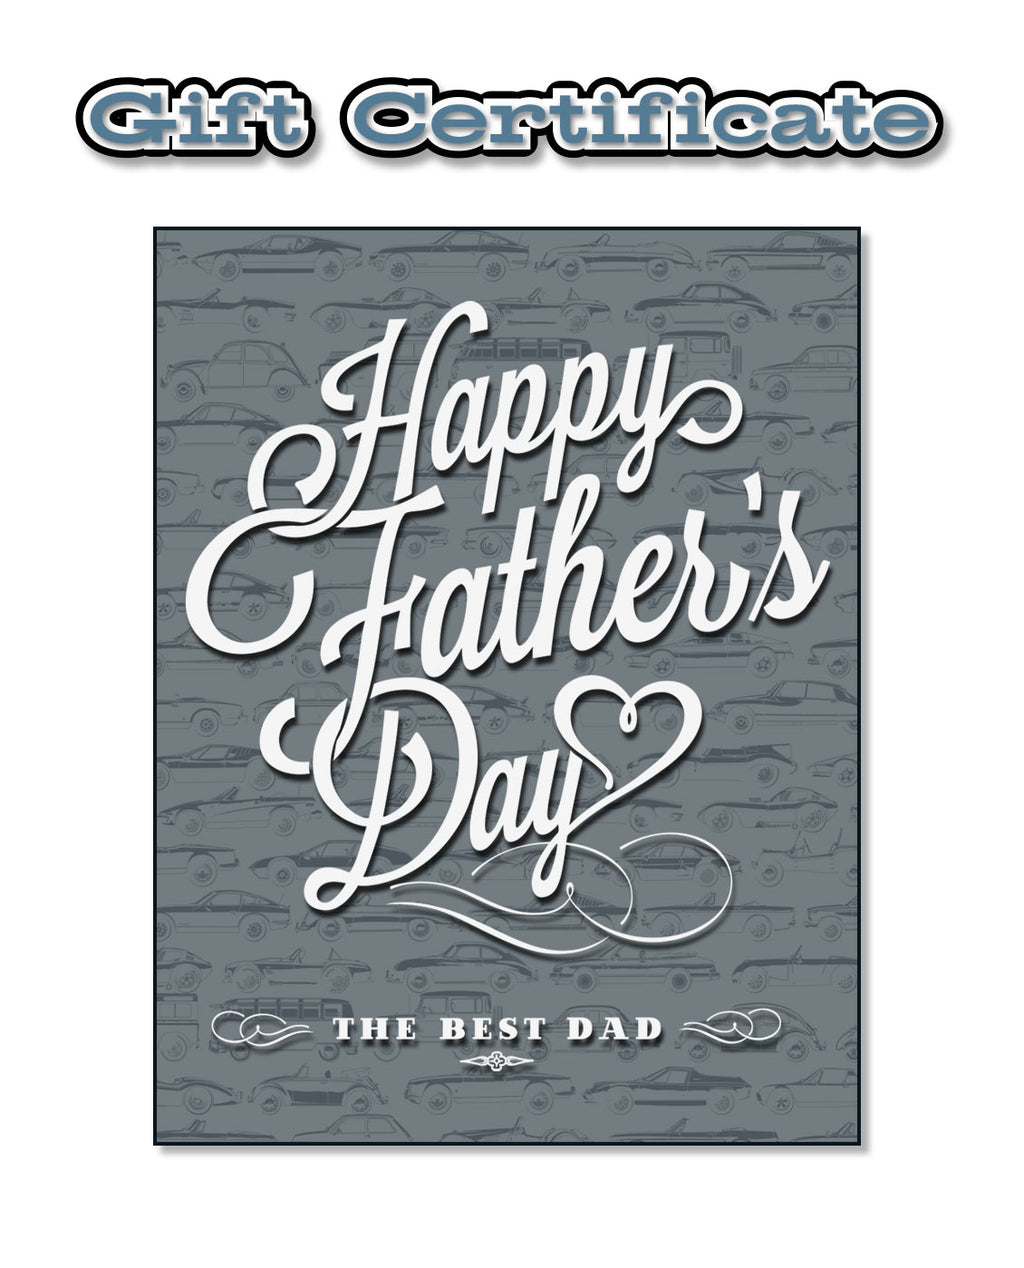 Gift Certificate - Father's Day!